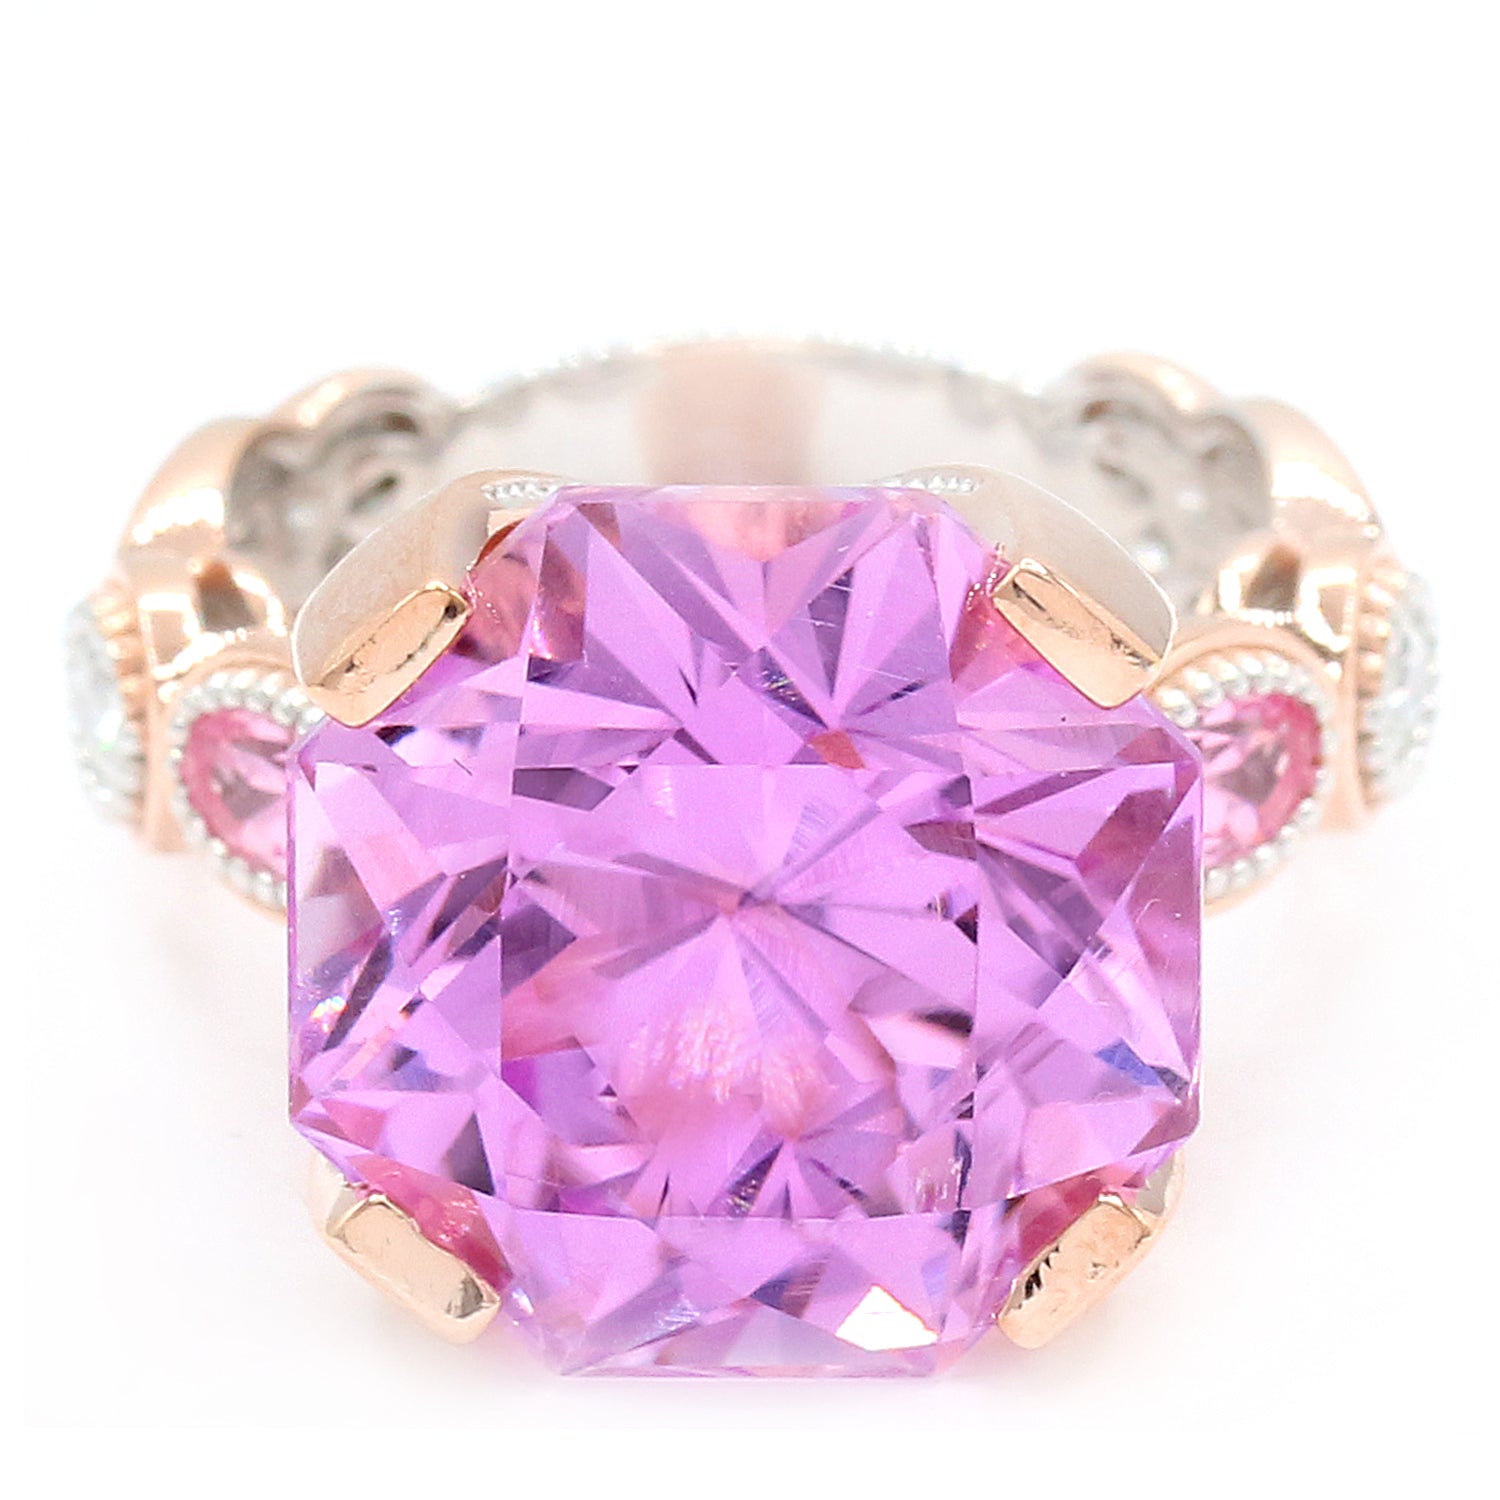 Limited Edition Gems en Vogue Luxe One-of-a-Kind 19.37ctw Kunzite, Tanzanian Pink Spinel & White Zircon Ring